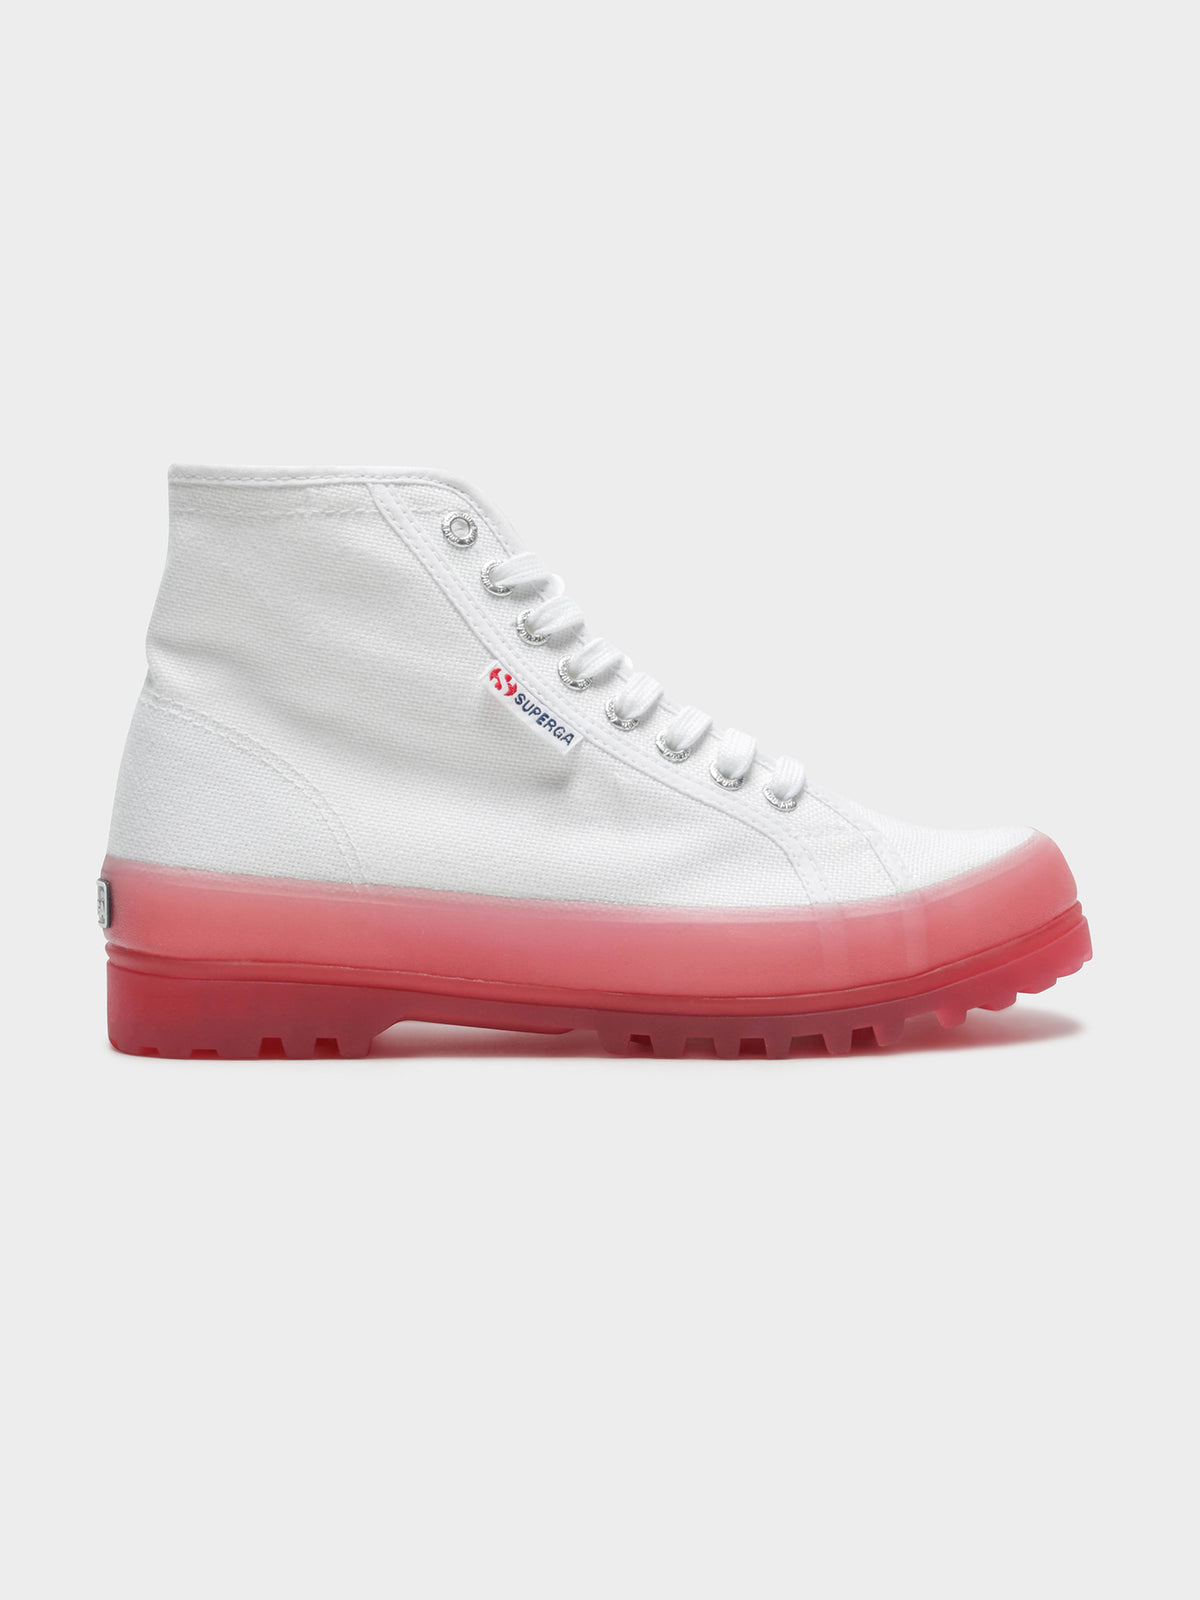 Womens 2341 Alpina Shoes in White &amp; Pink